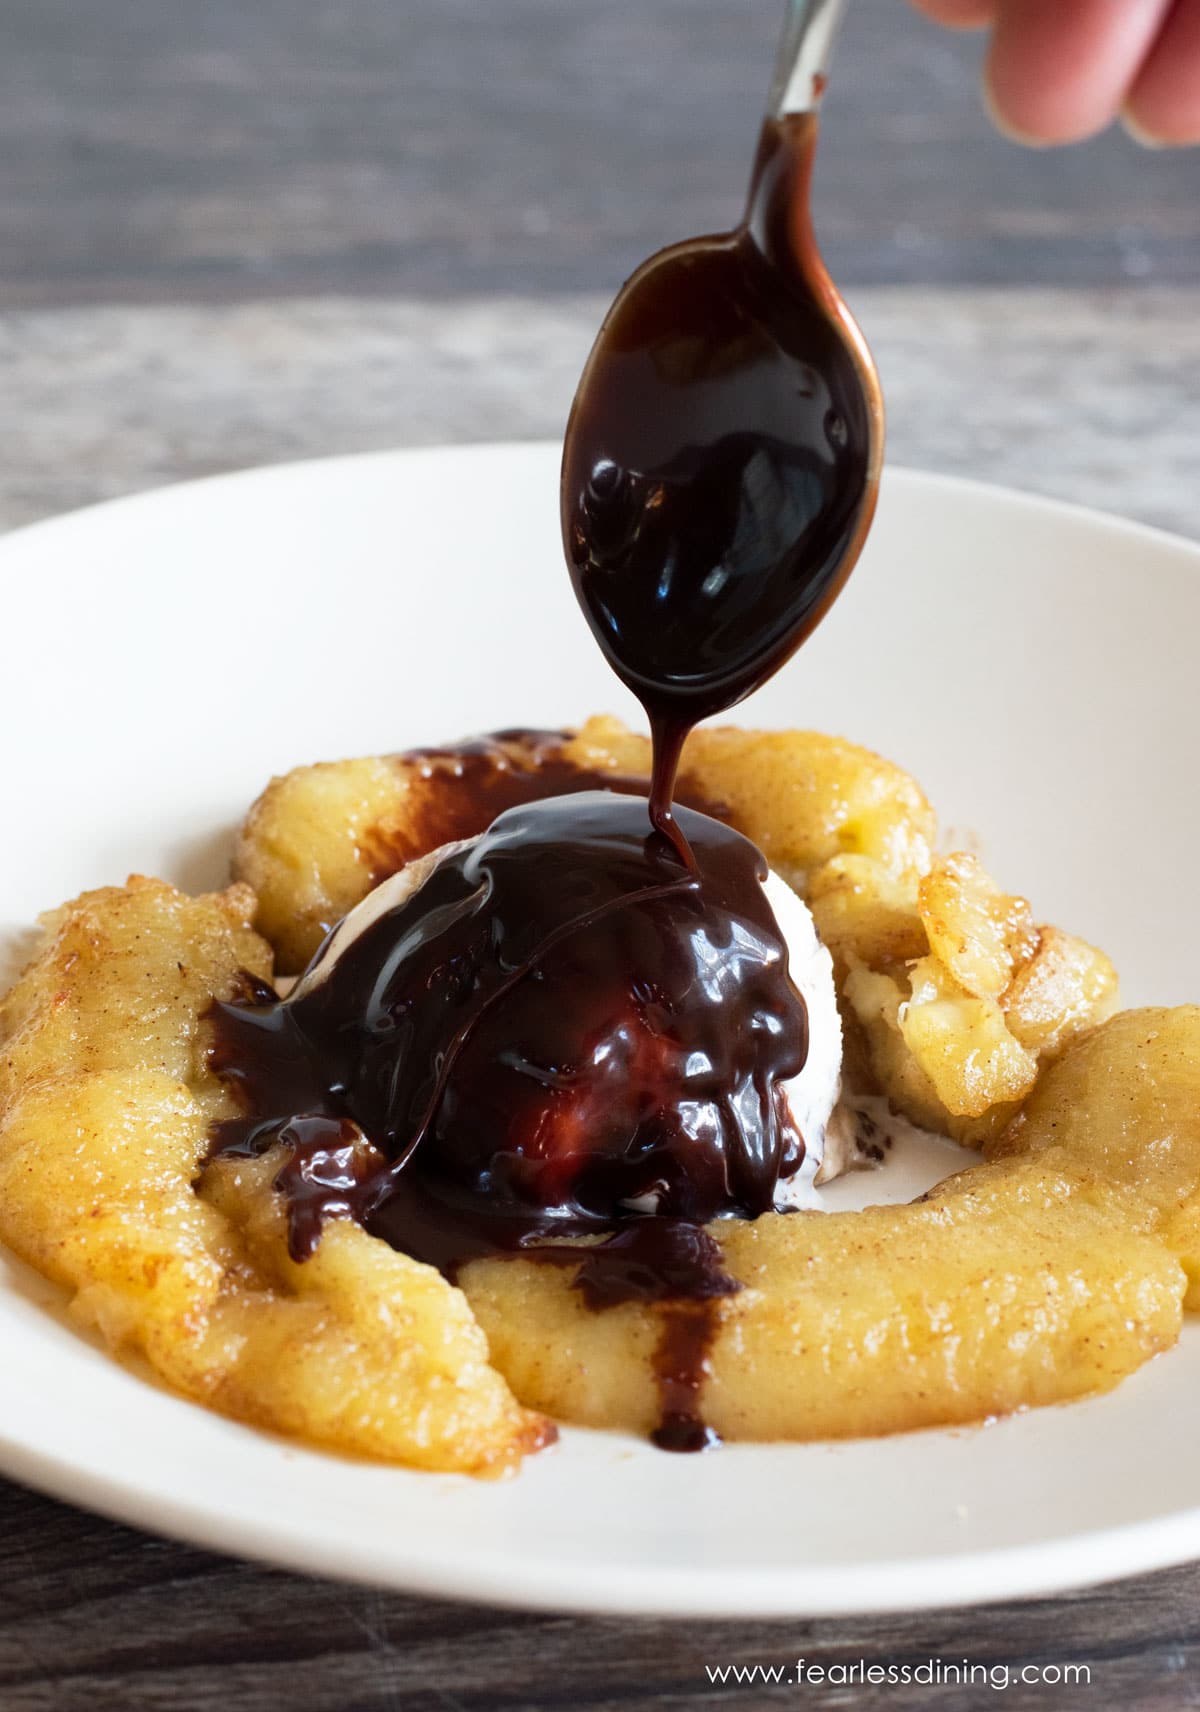 drizzling hot fudge over caramelized air fryer bananas and ice cream.